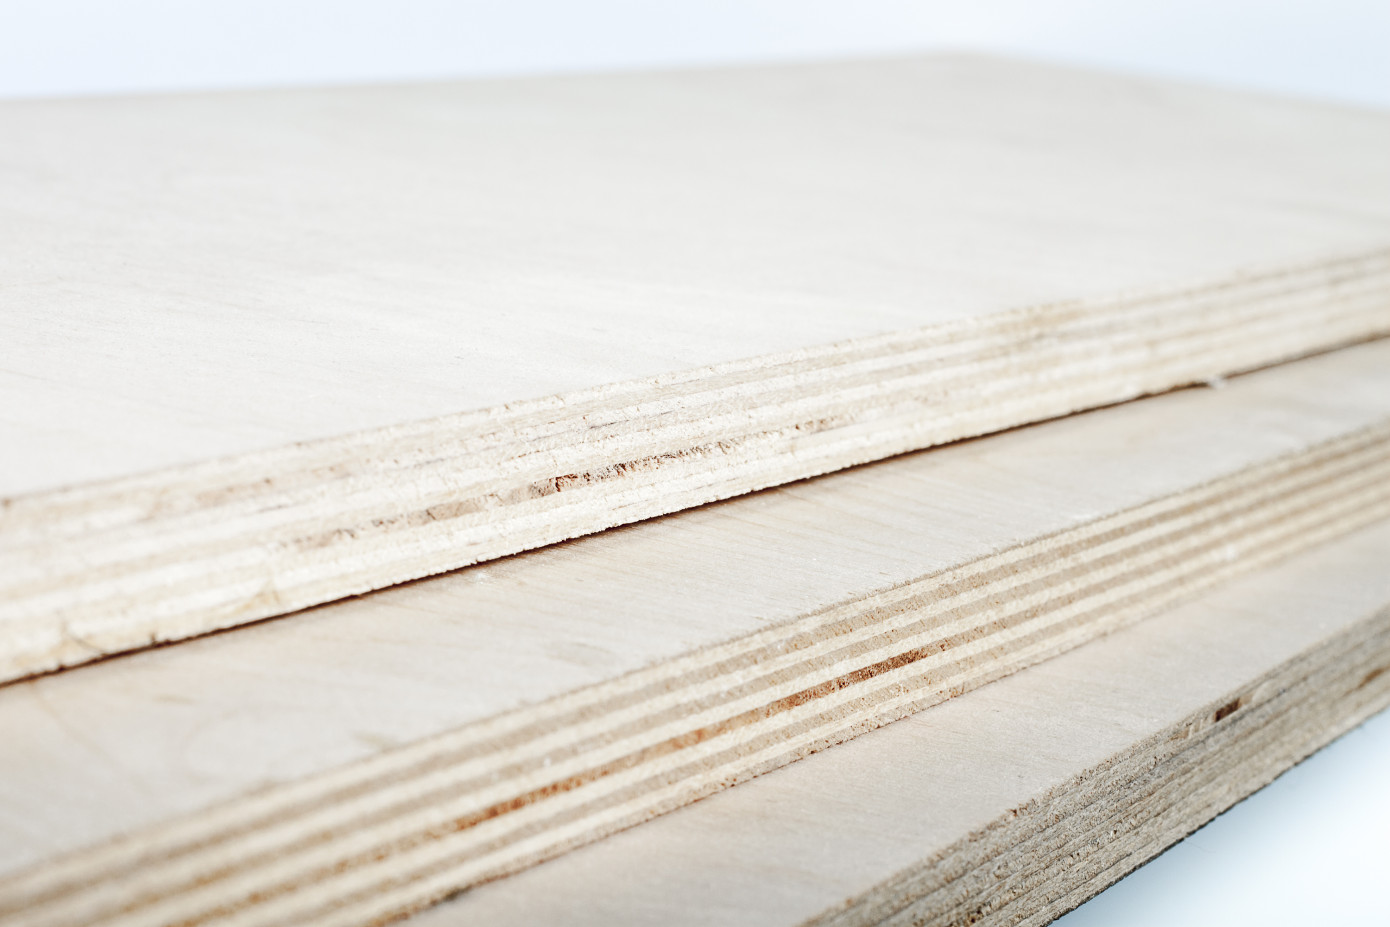 Brazil’s exports of tropical plywood increased by 45% in 2019